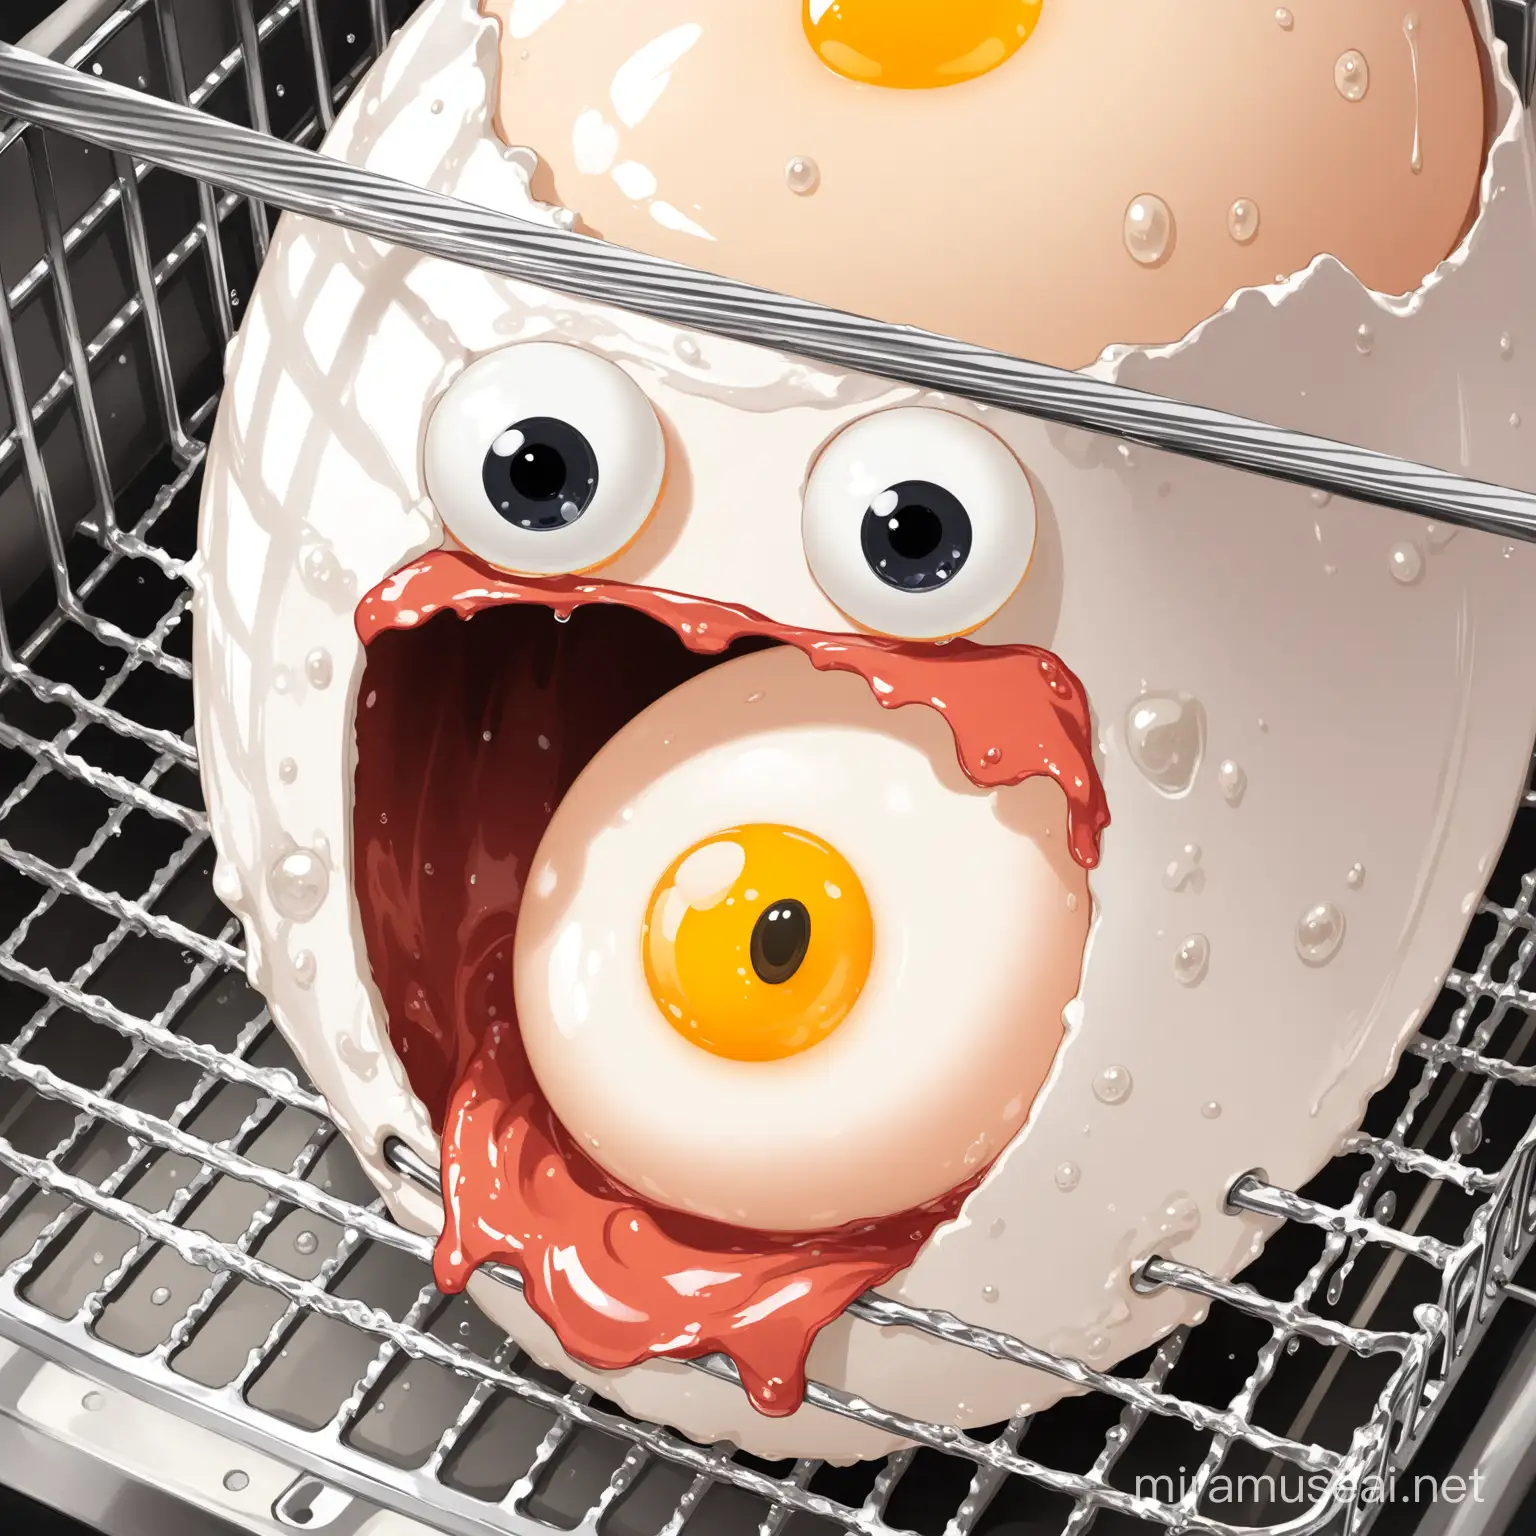 Quirky Googly Eyed Egg in Dishwasher